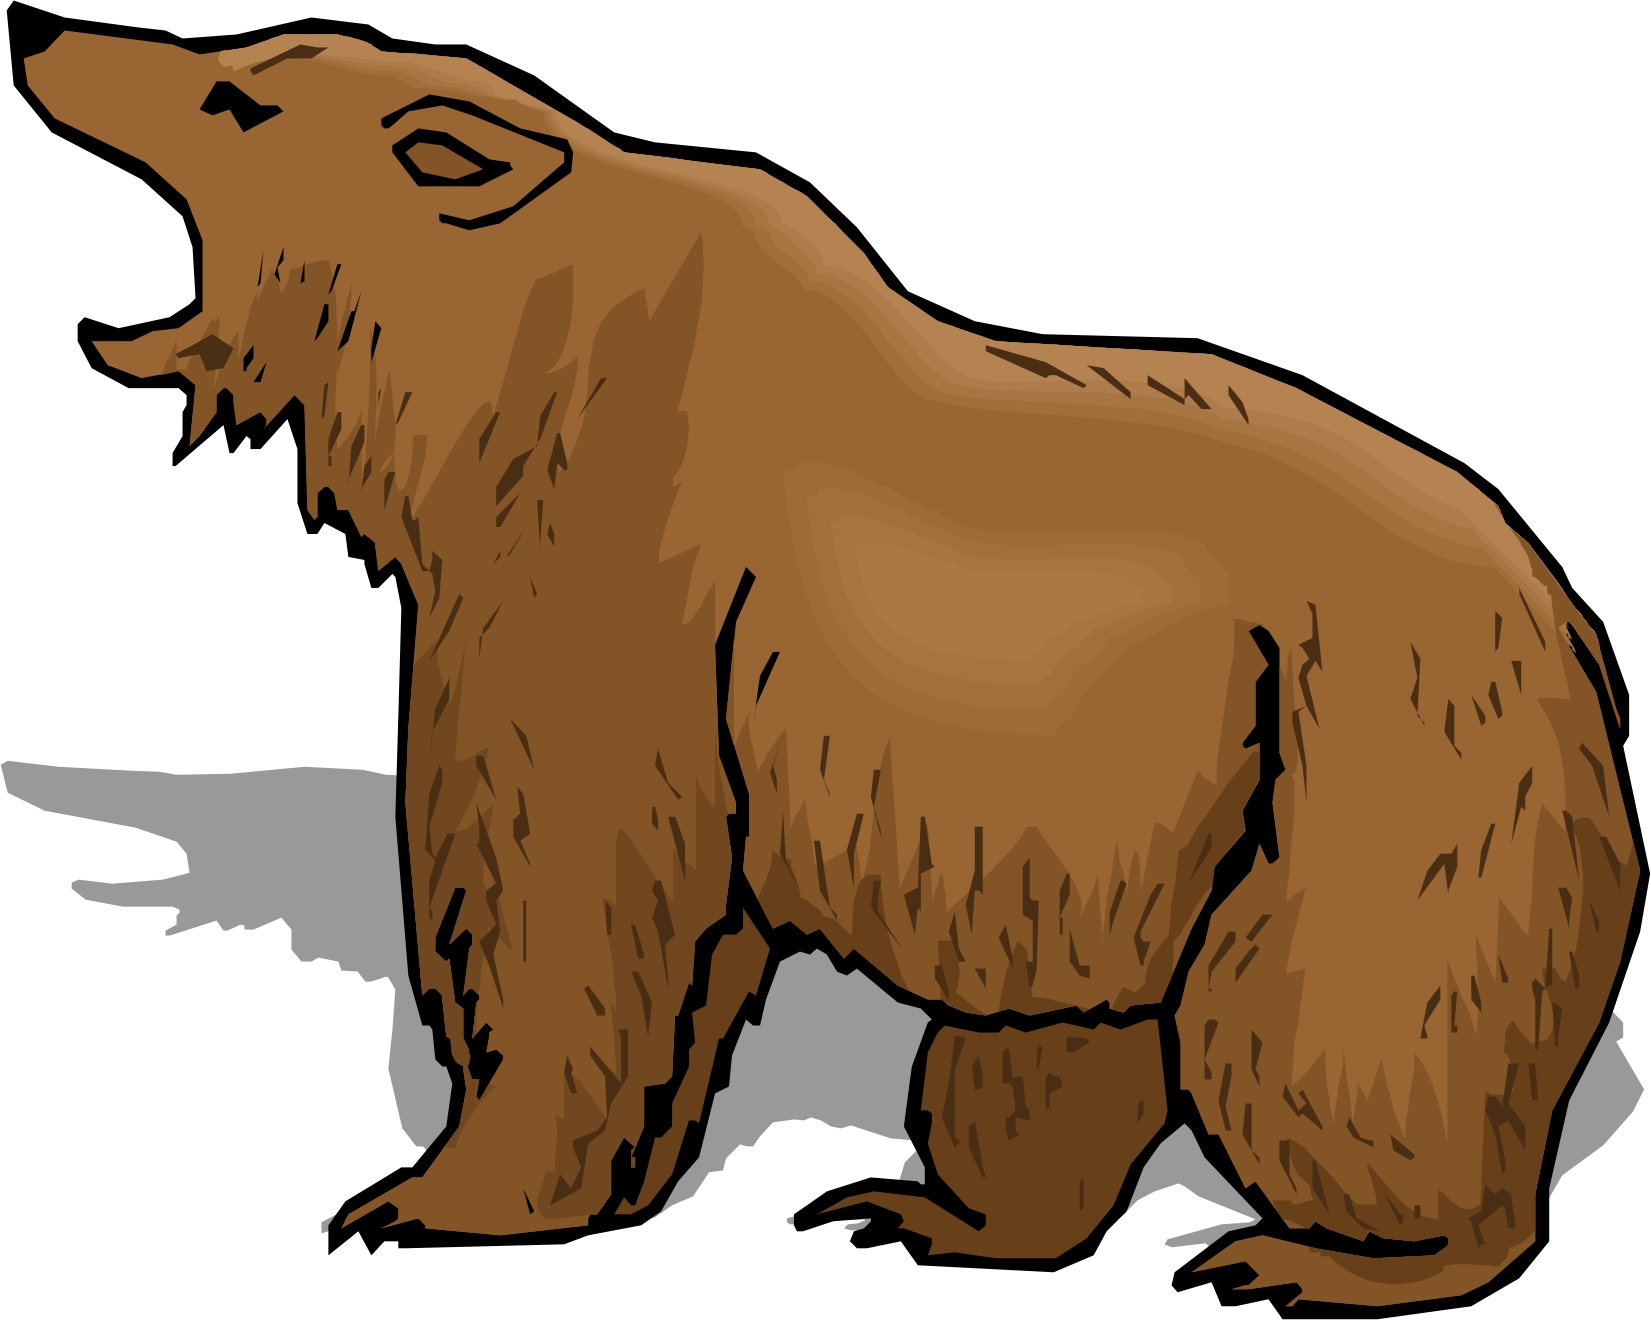 Grizzly bear clip art free vector for free download about 8 free 2 ...